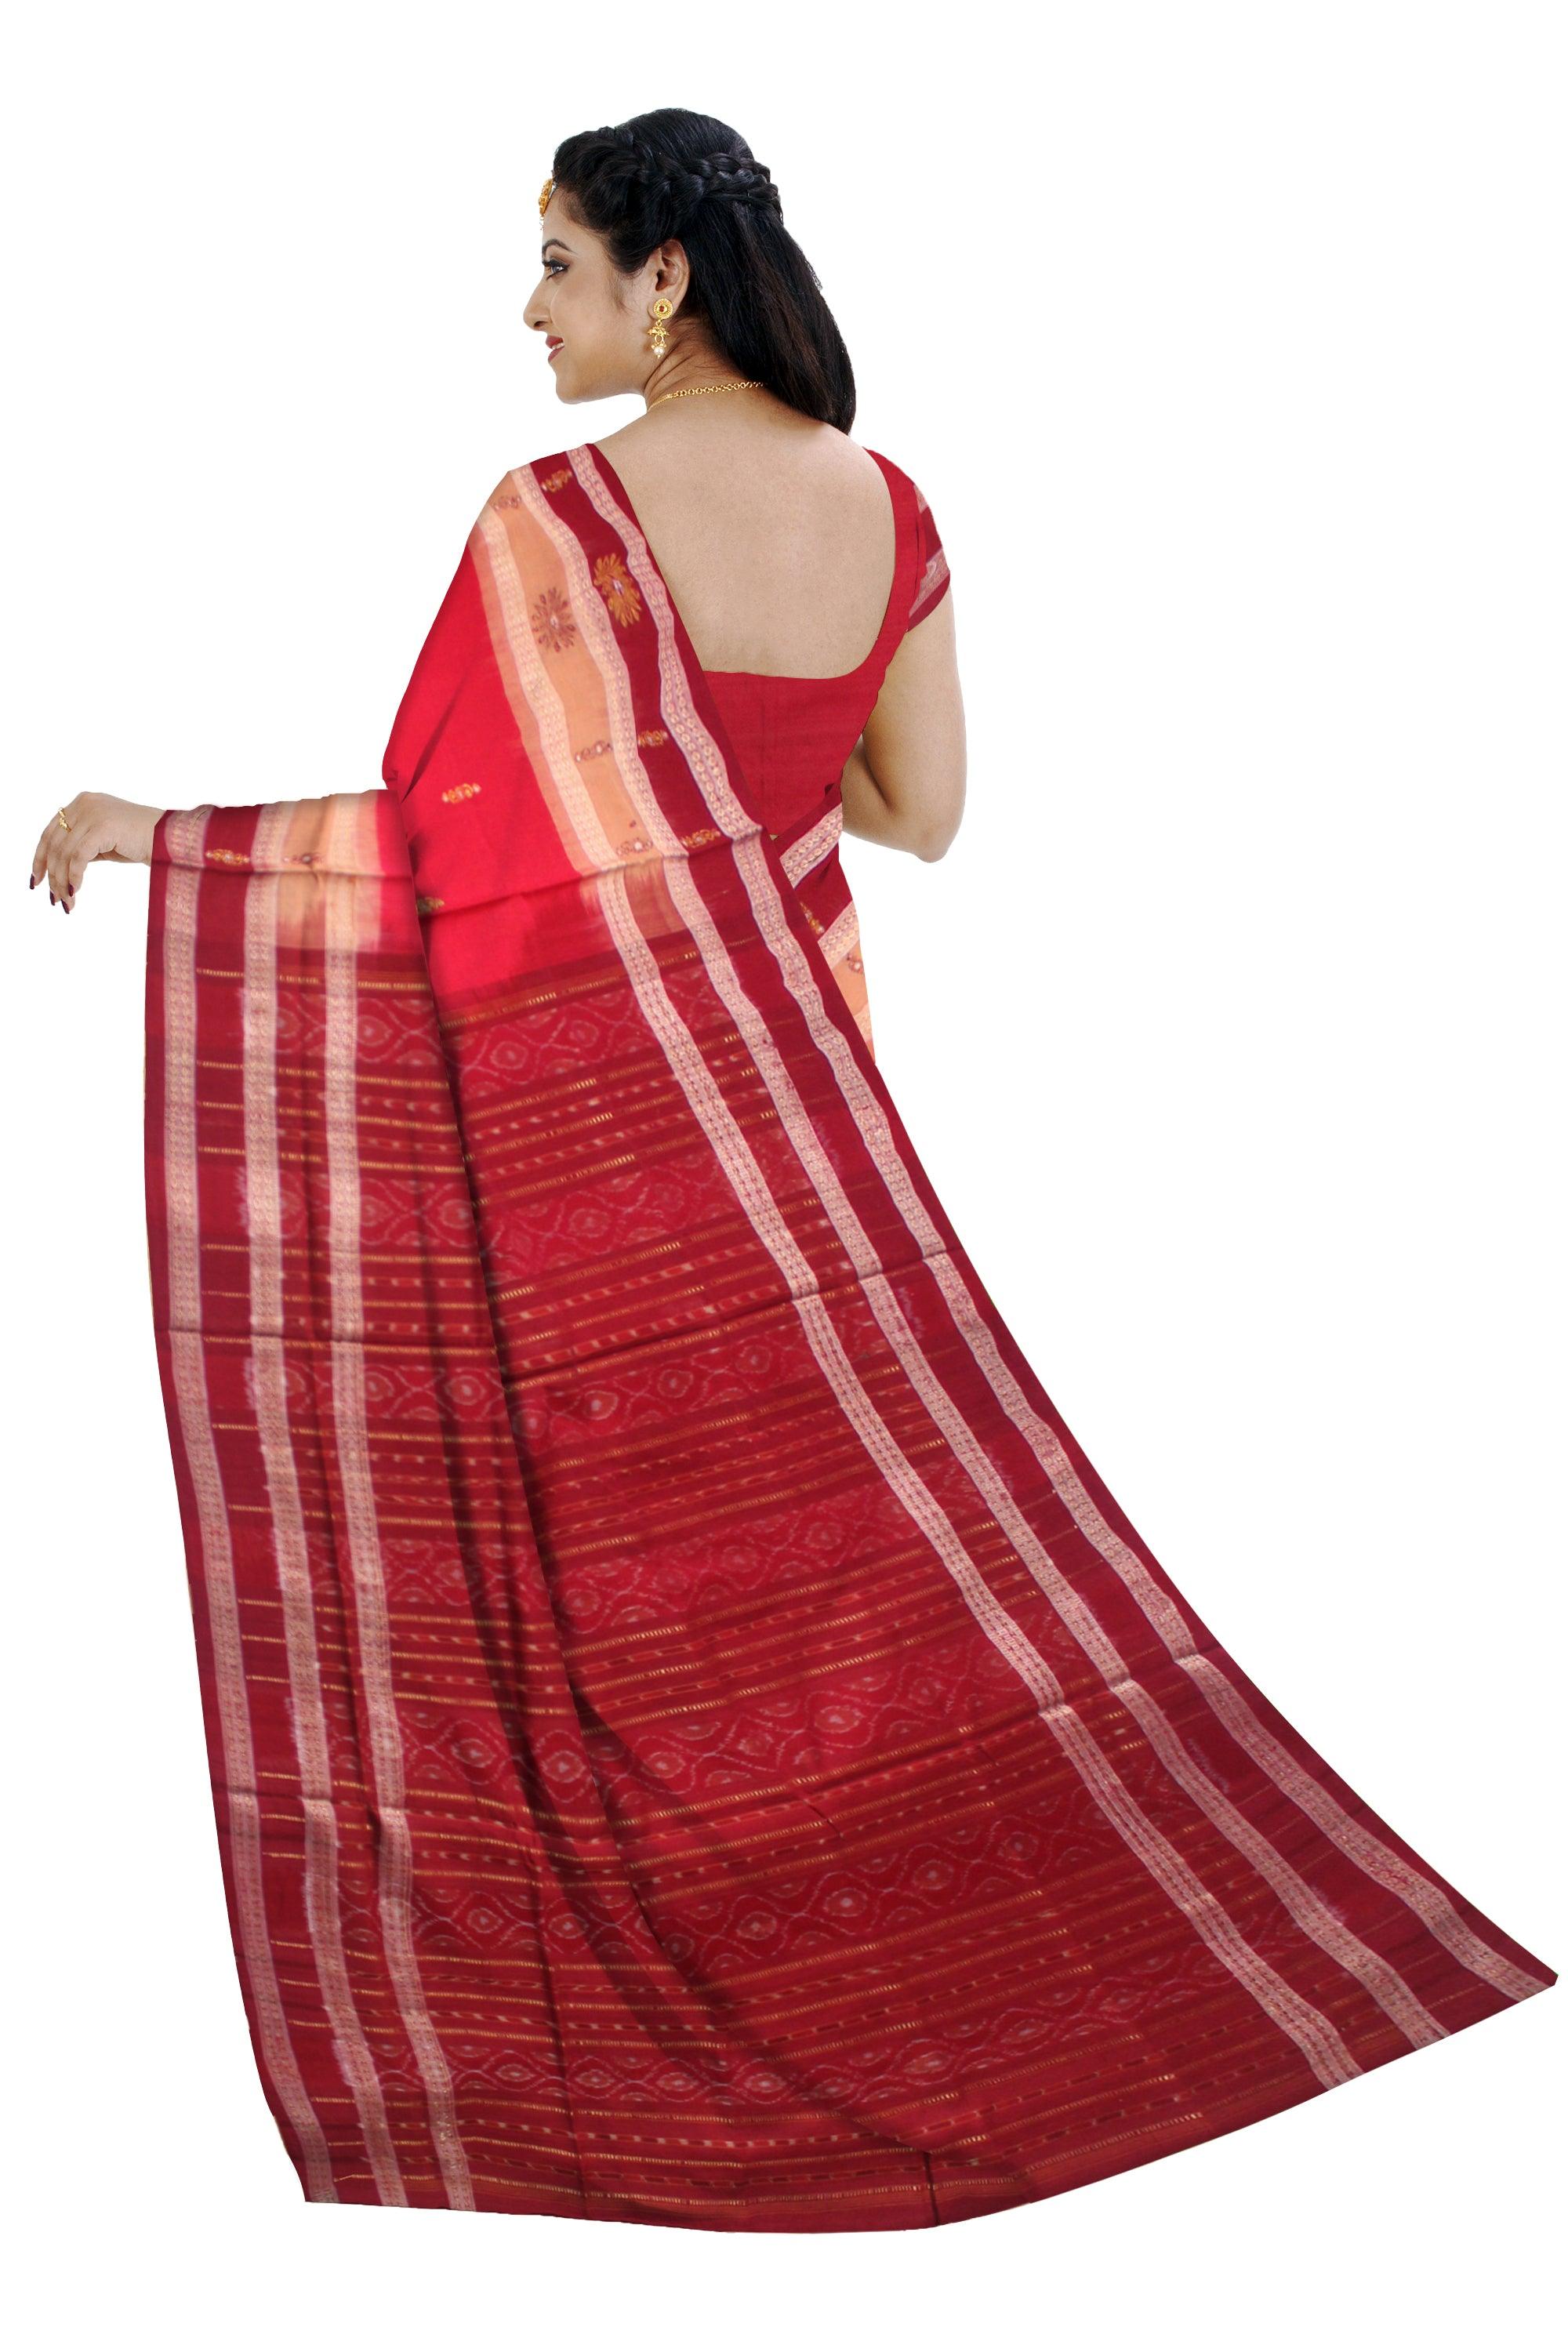 A SAMBALPURI BOOTY WORK BOMKEI COTTON SAREE IN RED AND MAROON COLOR BODY WITH BLOUSE PIECE. - Koshali Arts & Crafts Enterprise